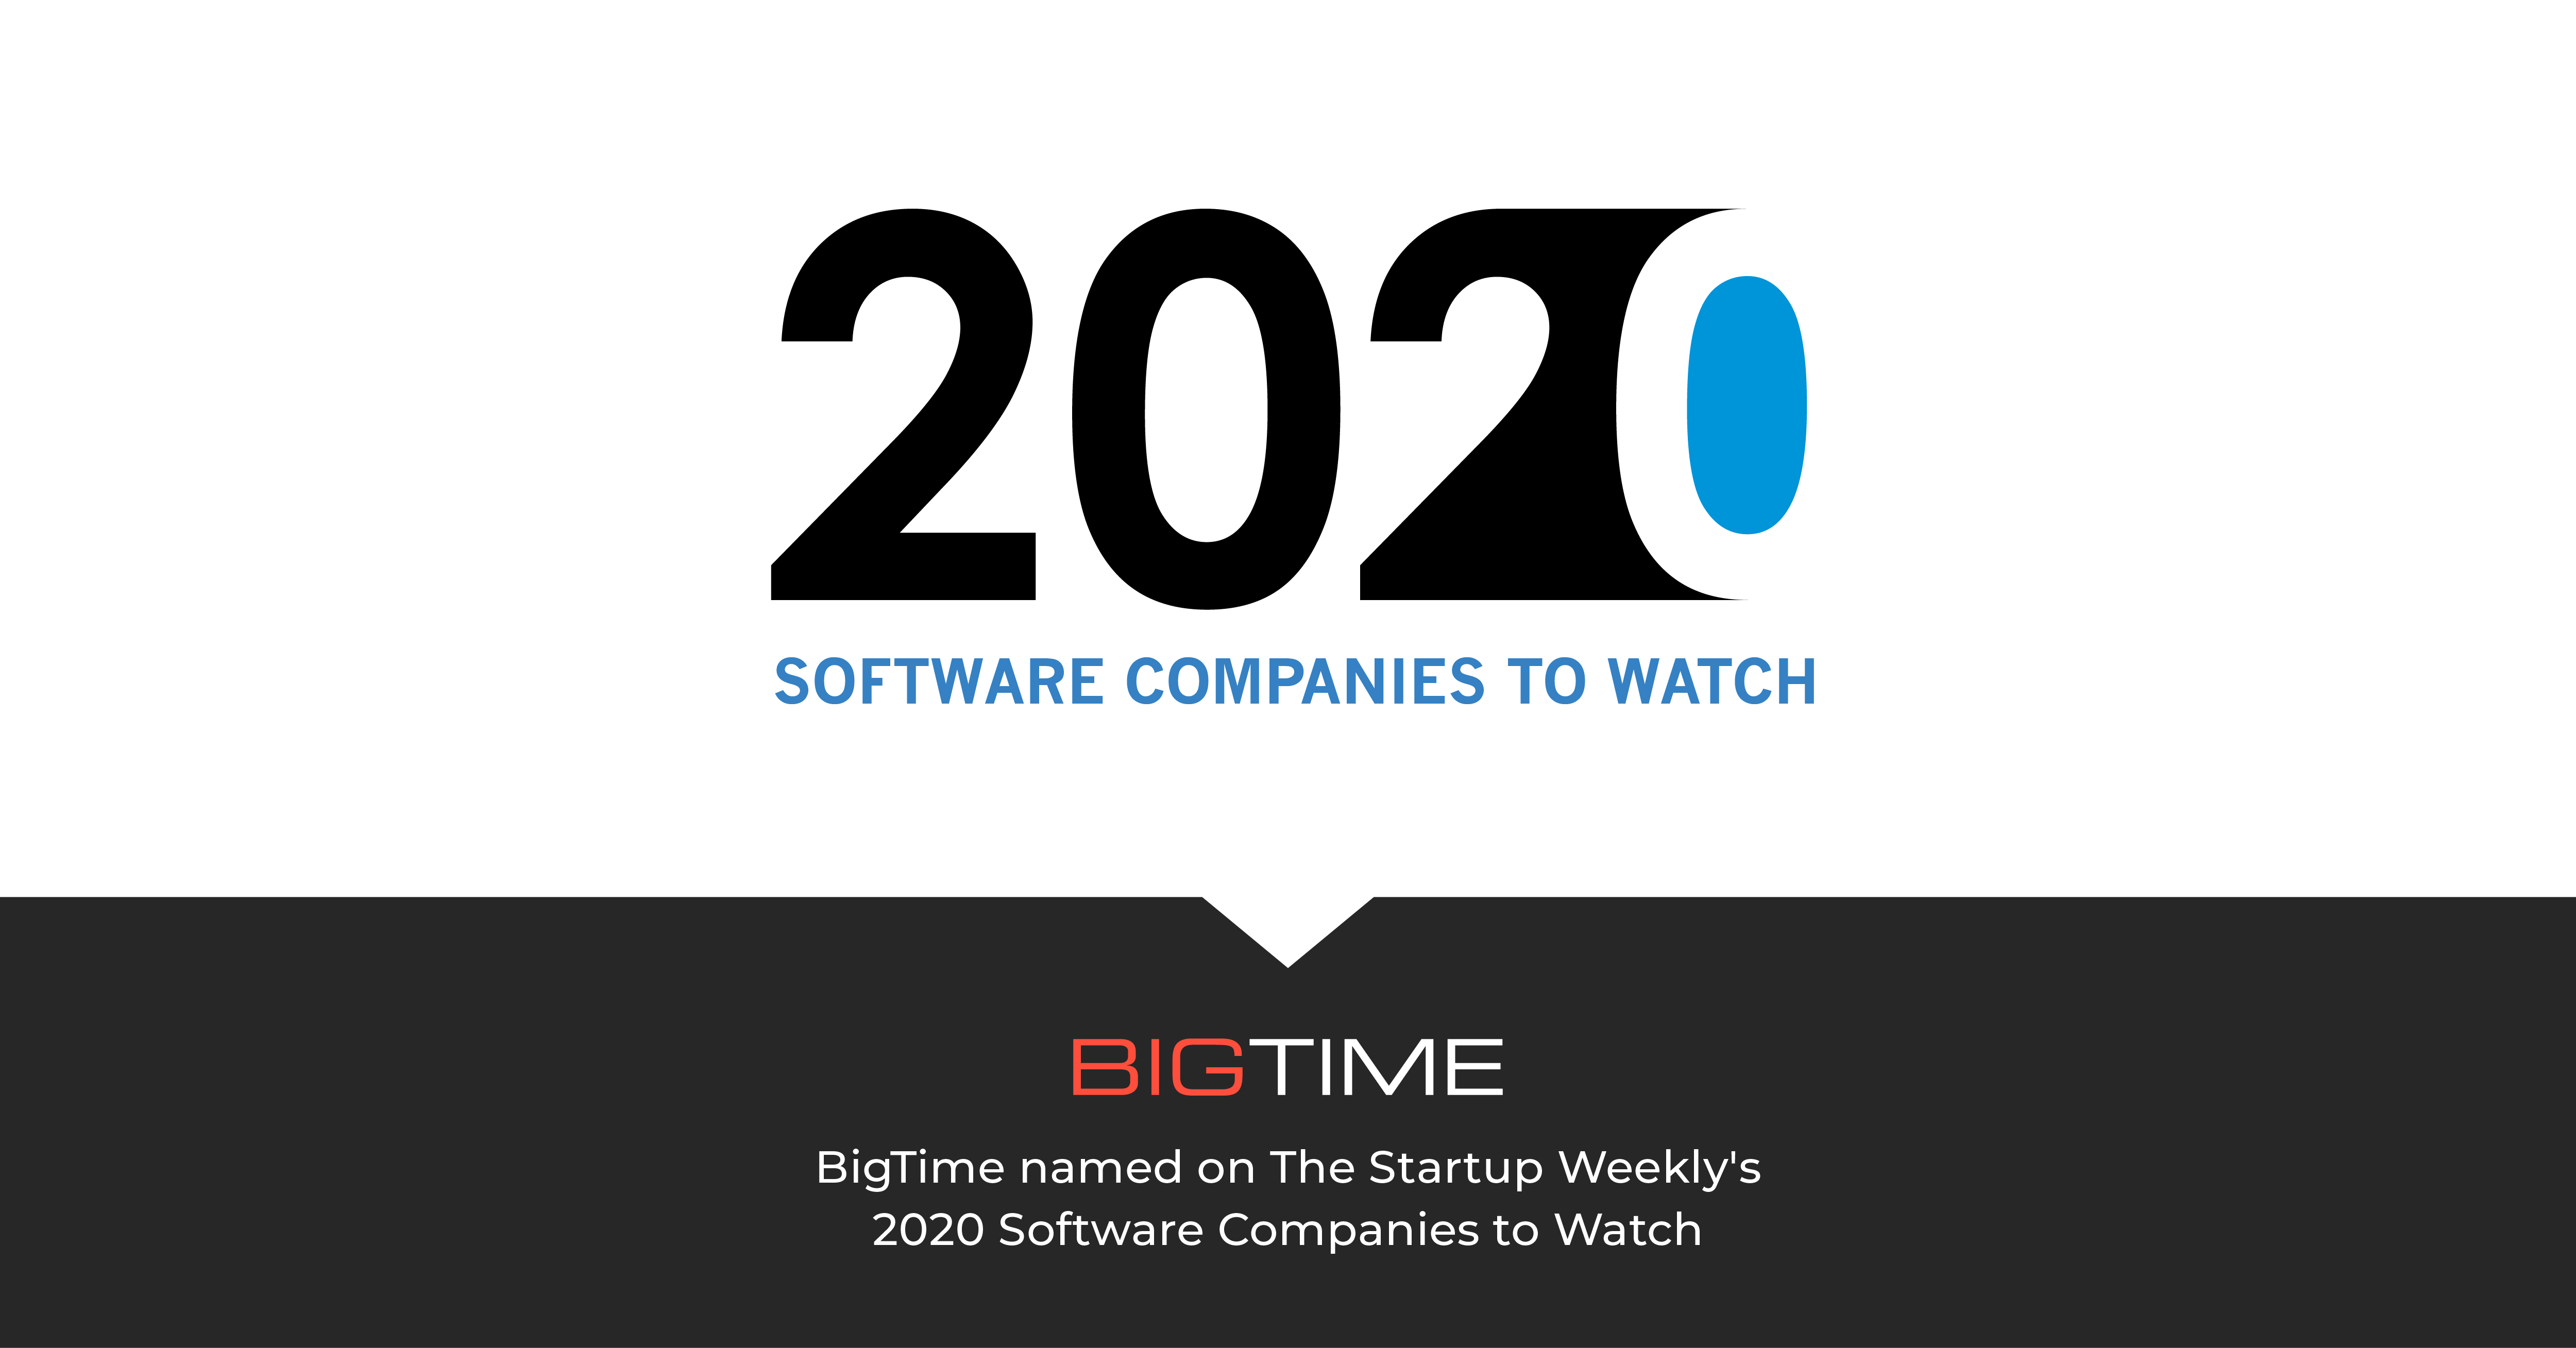 BigTime Software Recognized as One of Startup Weekly’s 2020 Software Companies to Watch